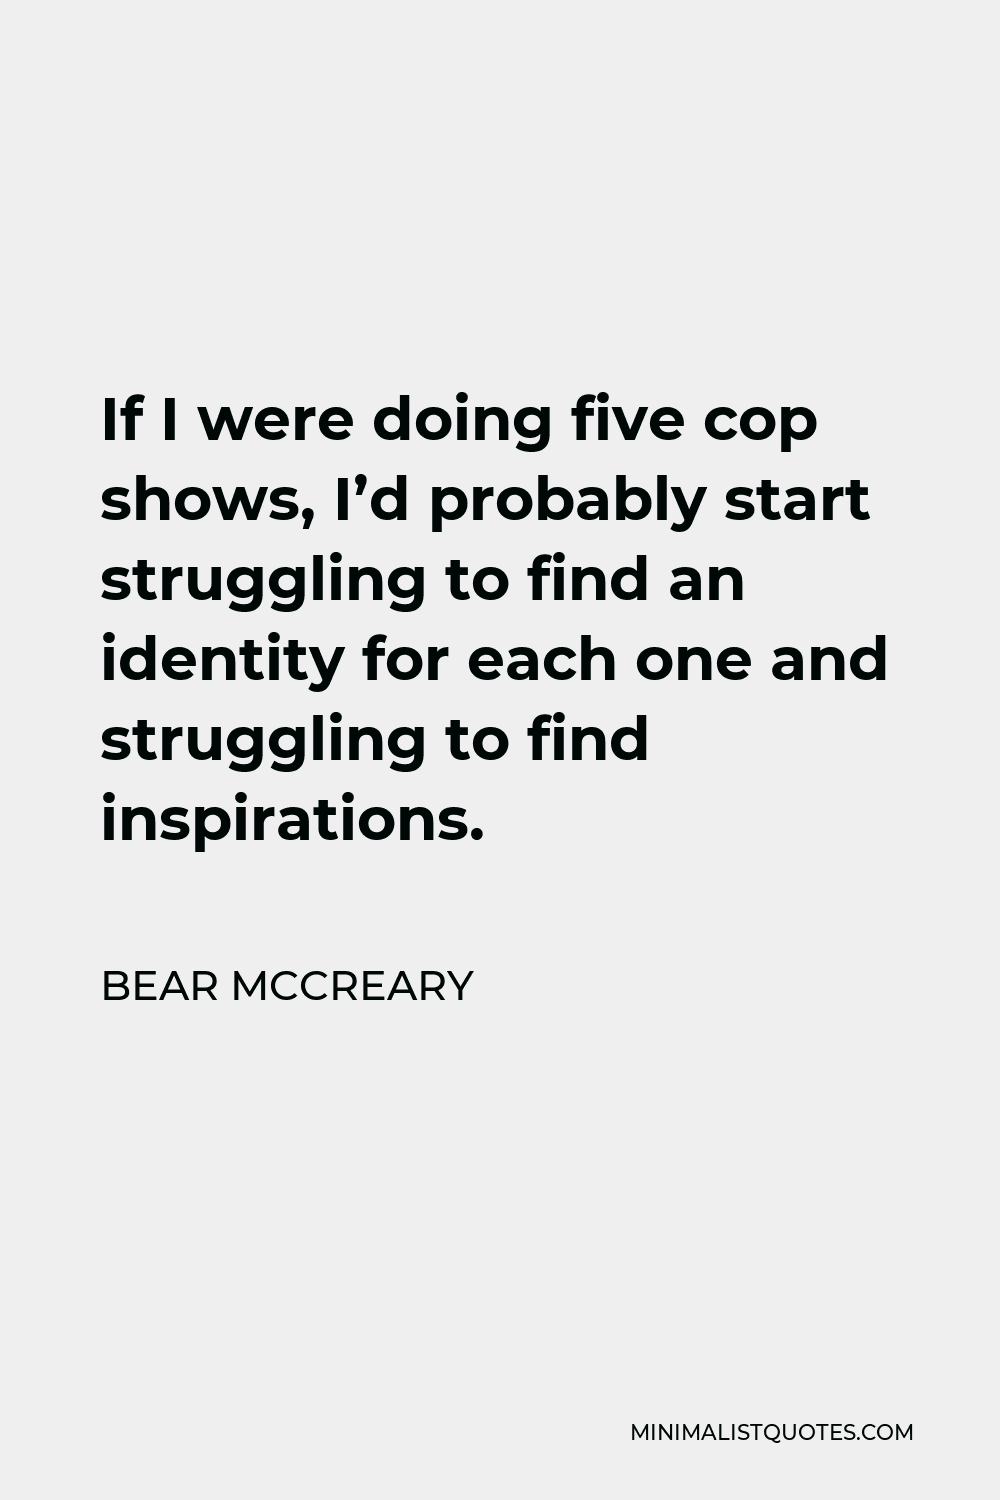 Bear McCreary Quote - If I were doing five cop shows, I’d probably start struggling to find an identity for each one and struggling to find inspirations.